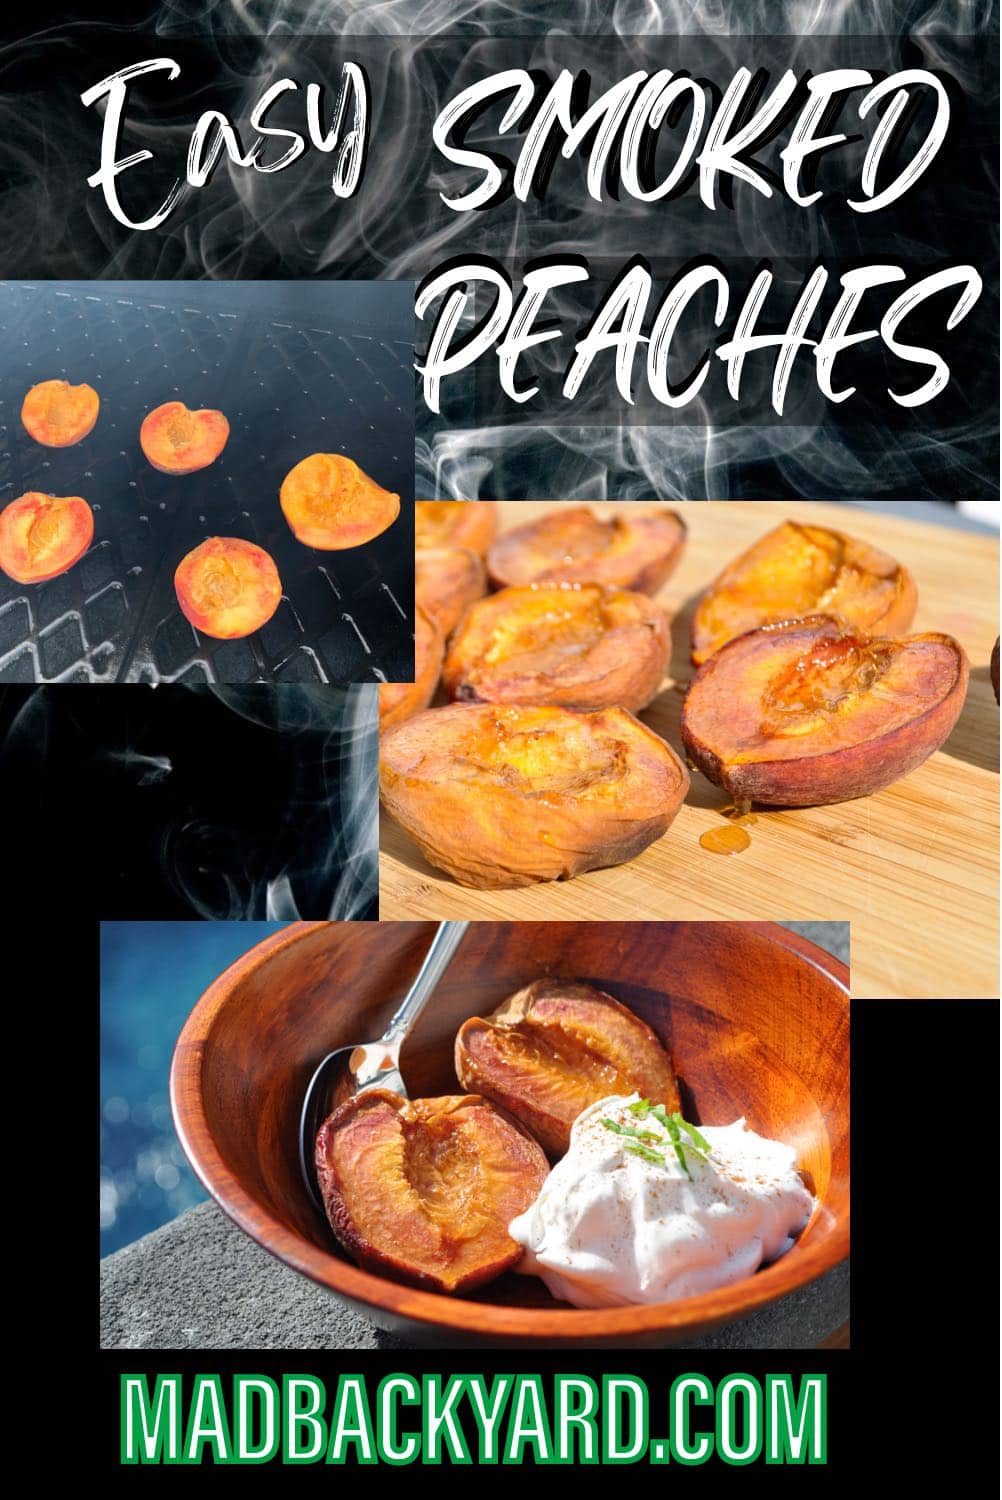 Smoked Peaches PIN for Mad Backyard